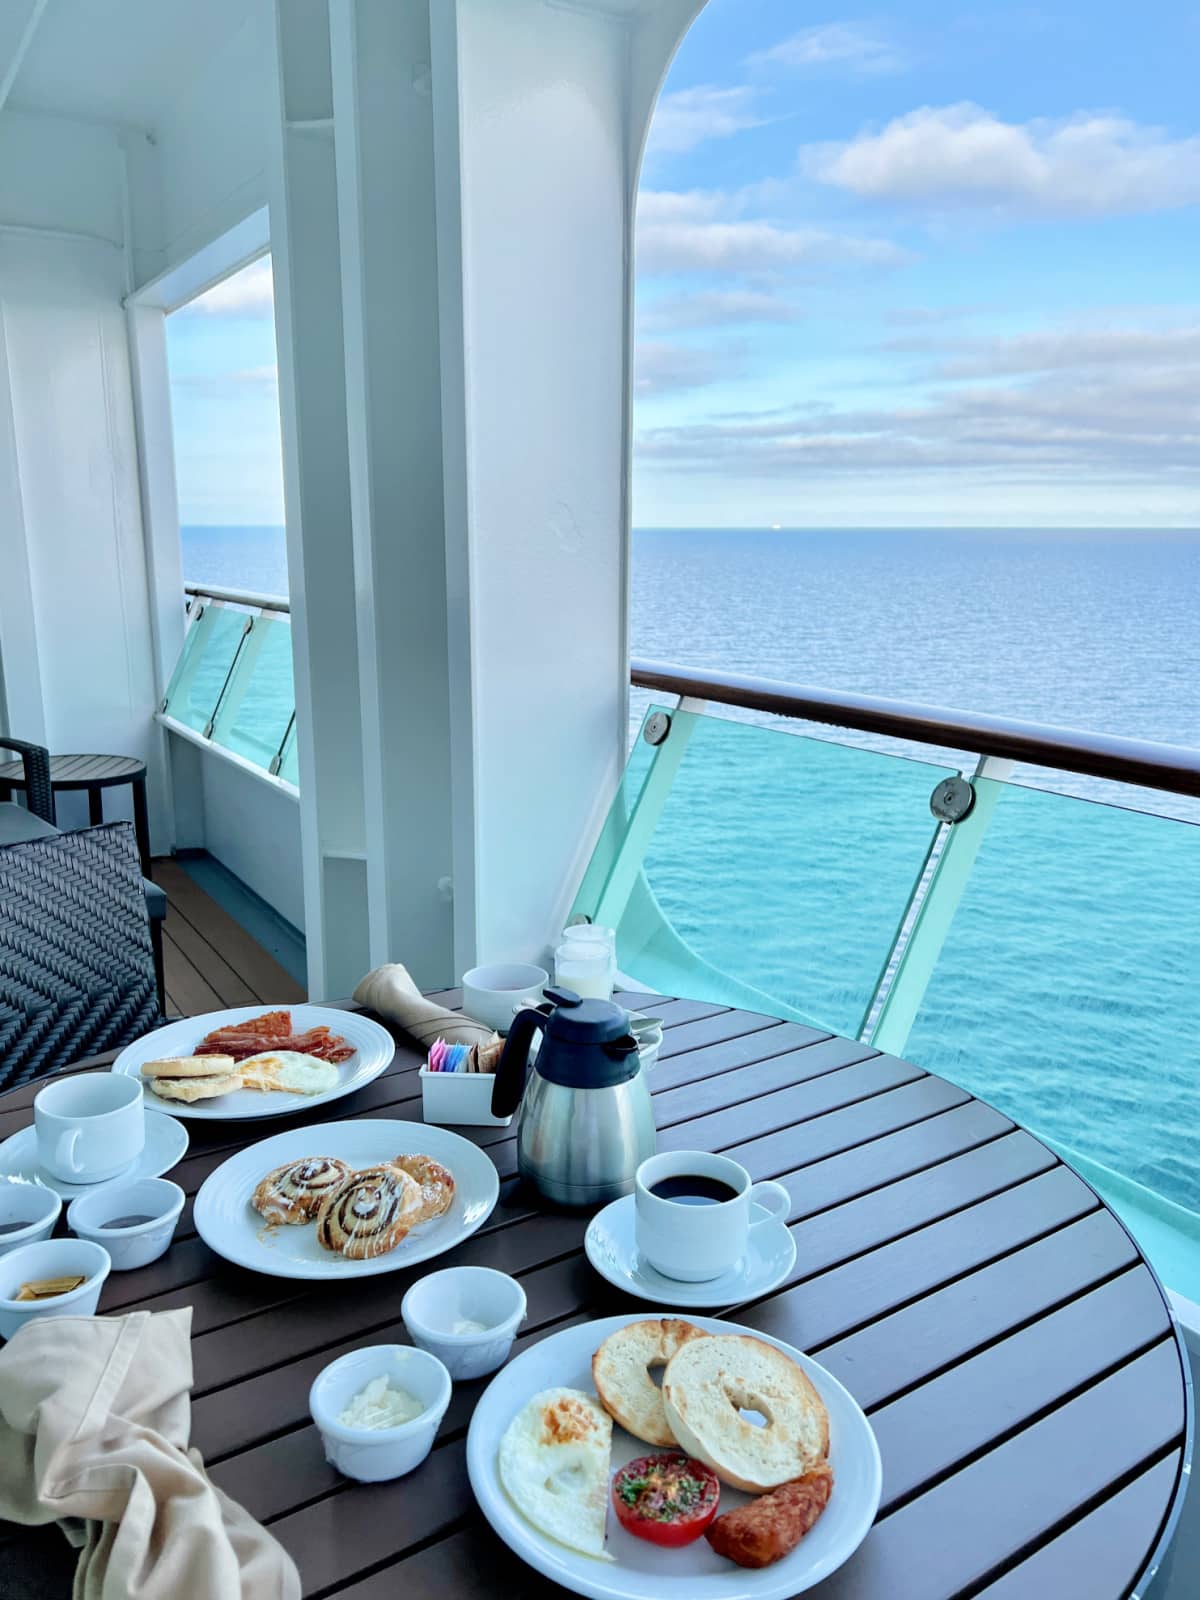 Breakfast on the balcony of a cruise ship.